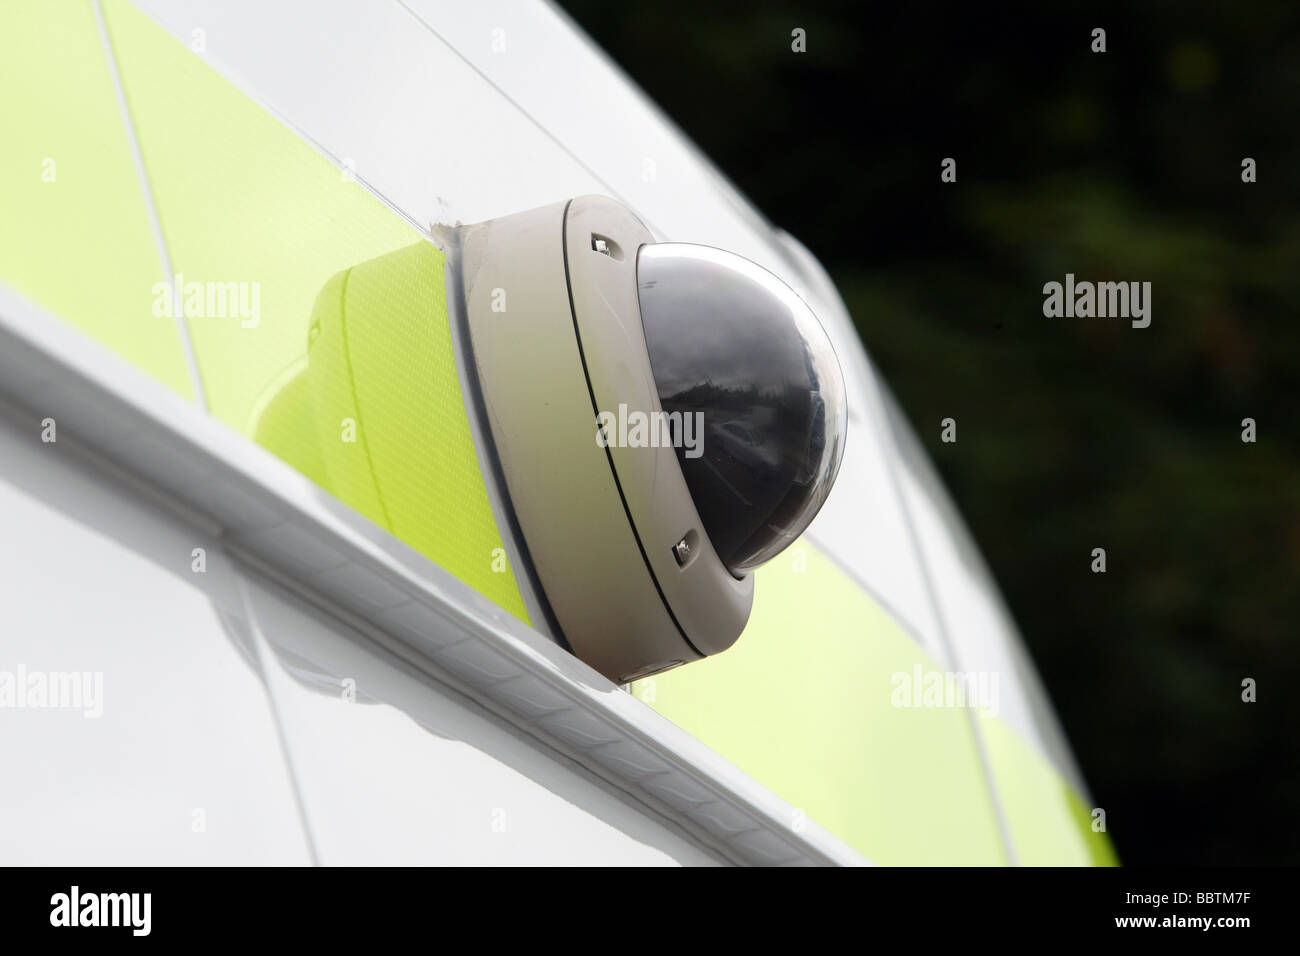 The Commander camera mounted on the side of a Safety camera van in Aberdeen, Scotland, UK Stock Photo